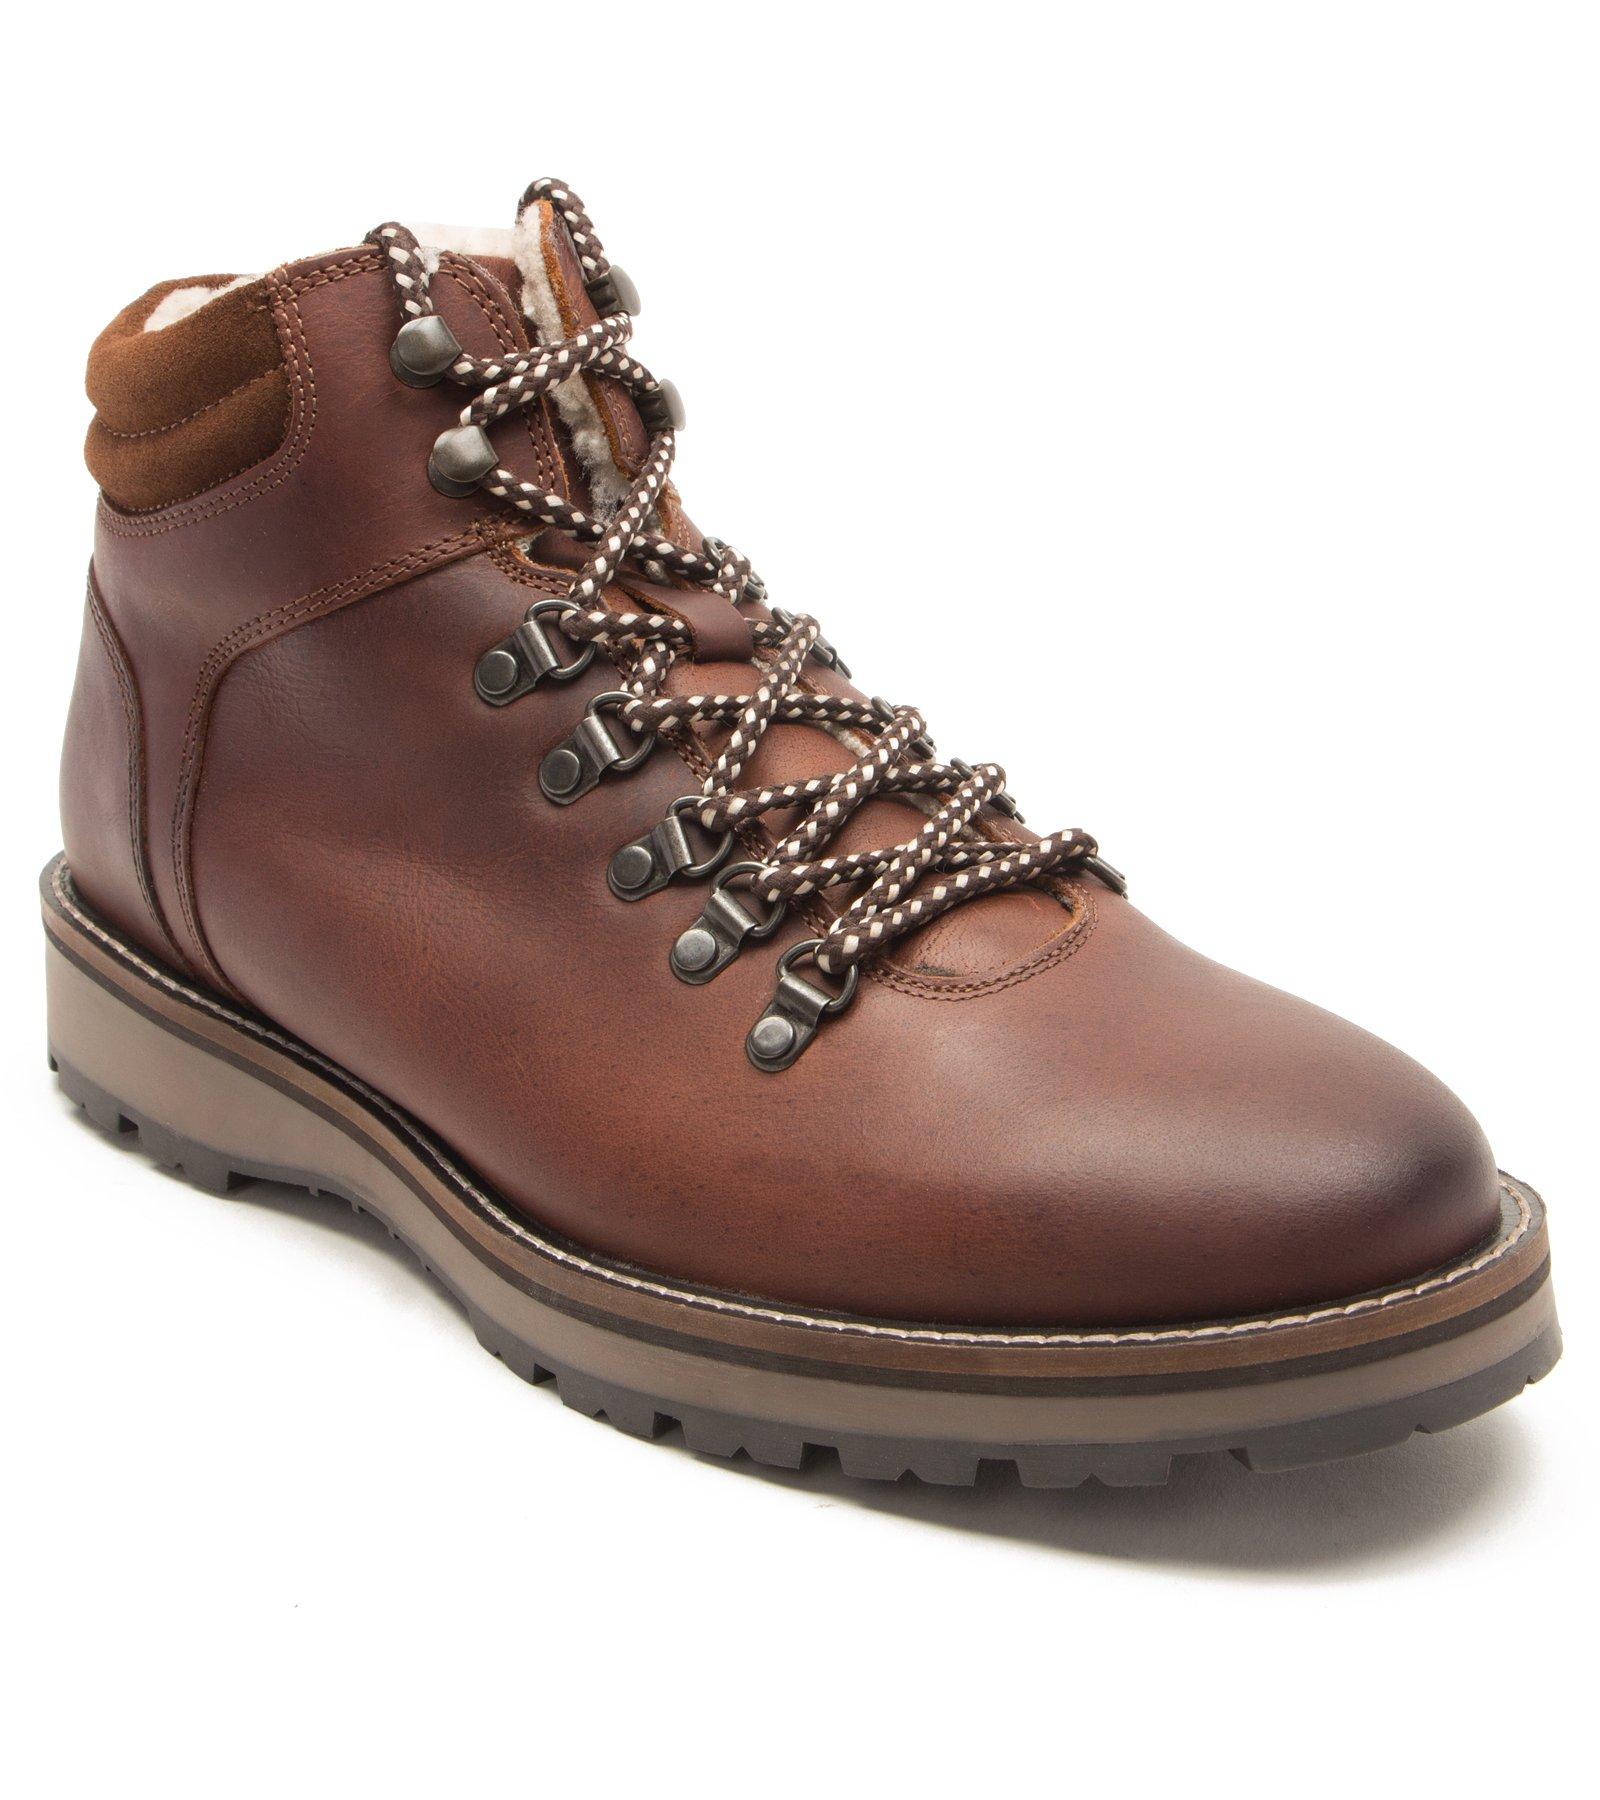 'Dekker' Hiker Style Mid-Height Casual Leather Boots